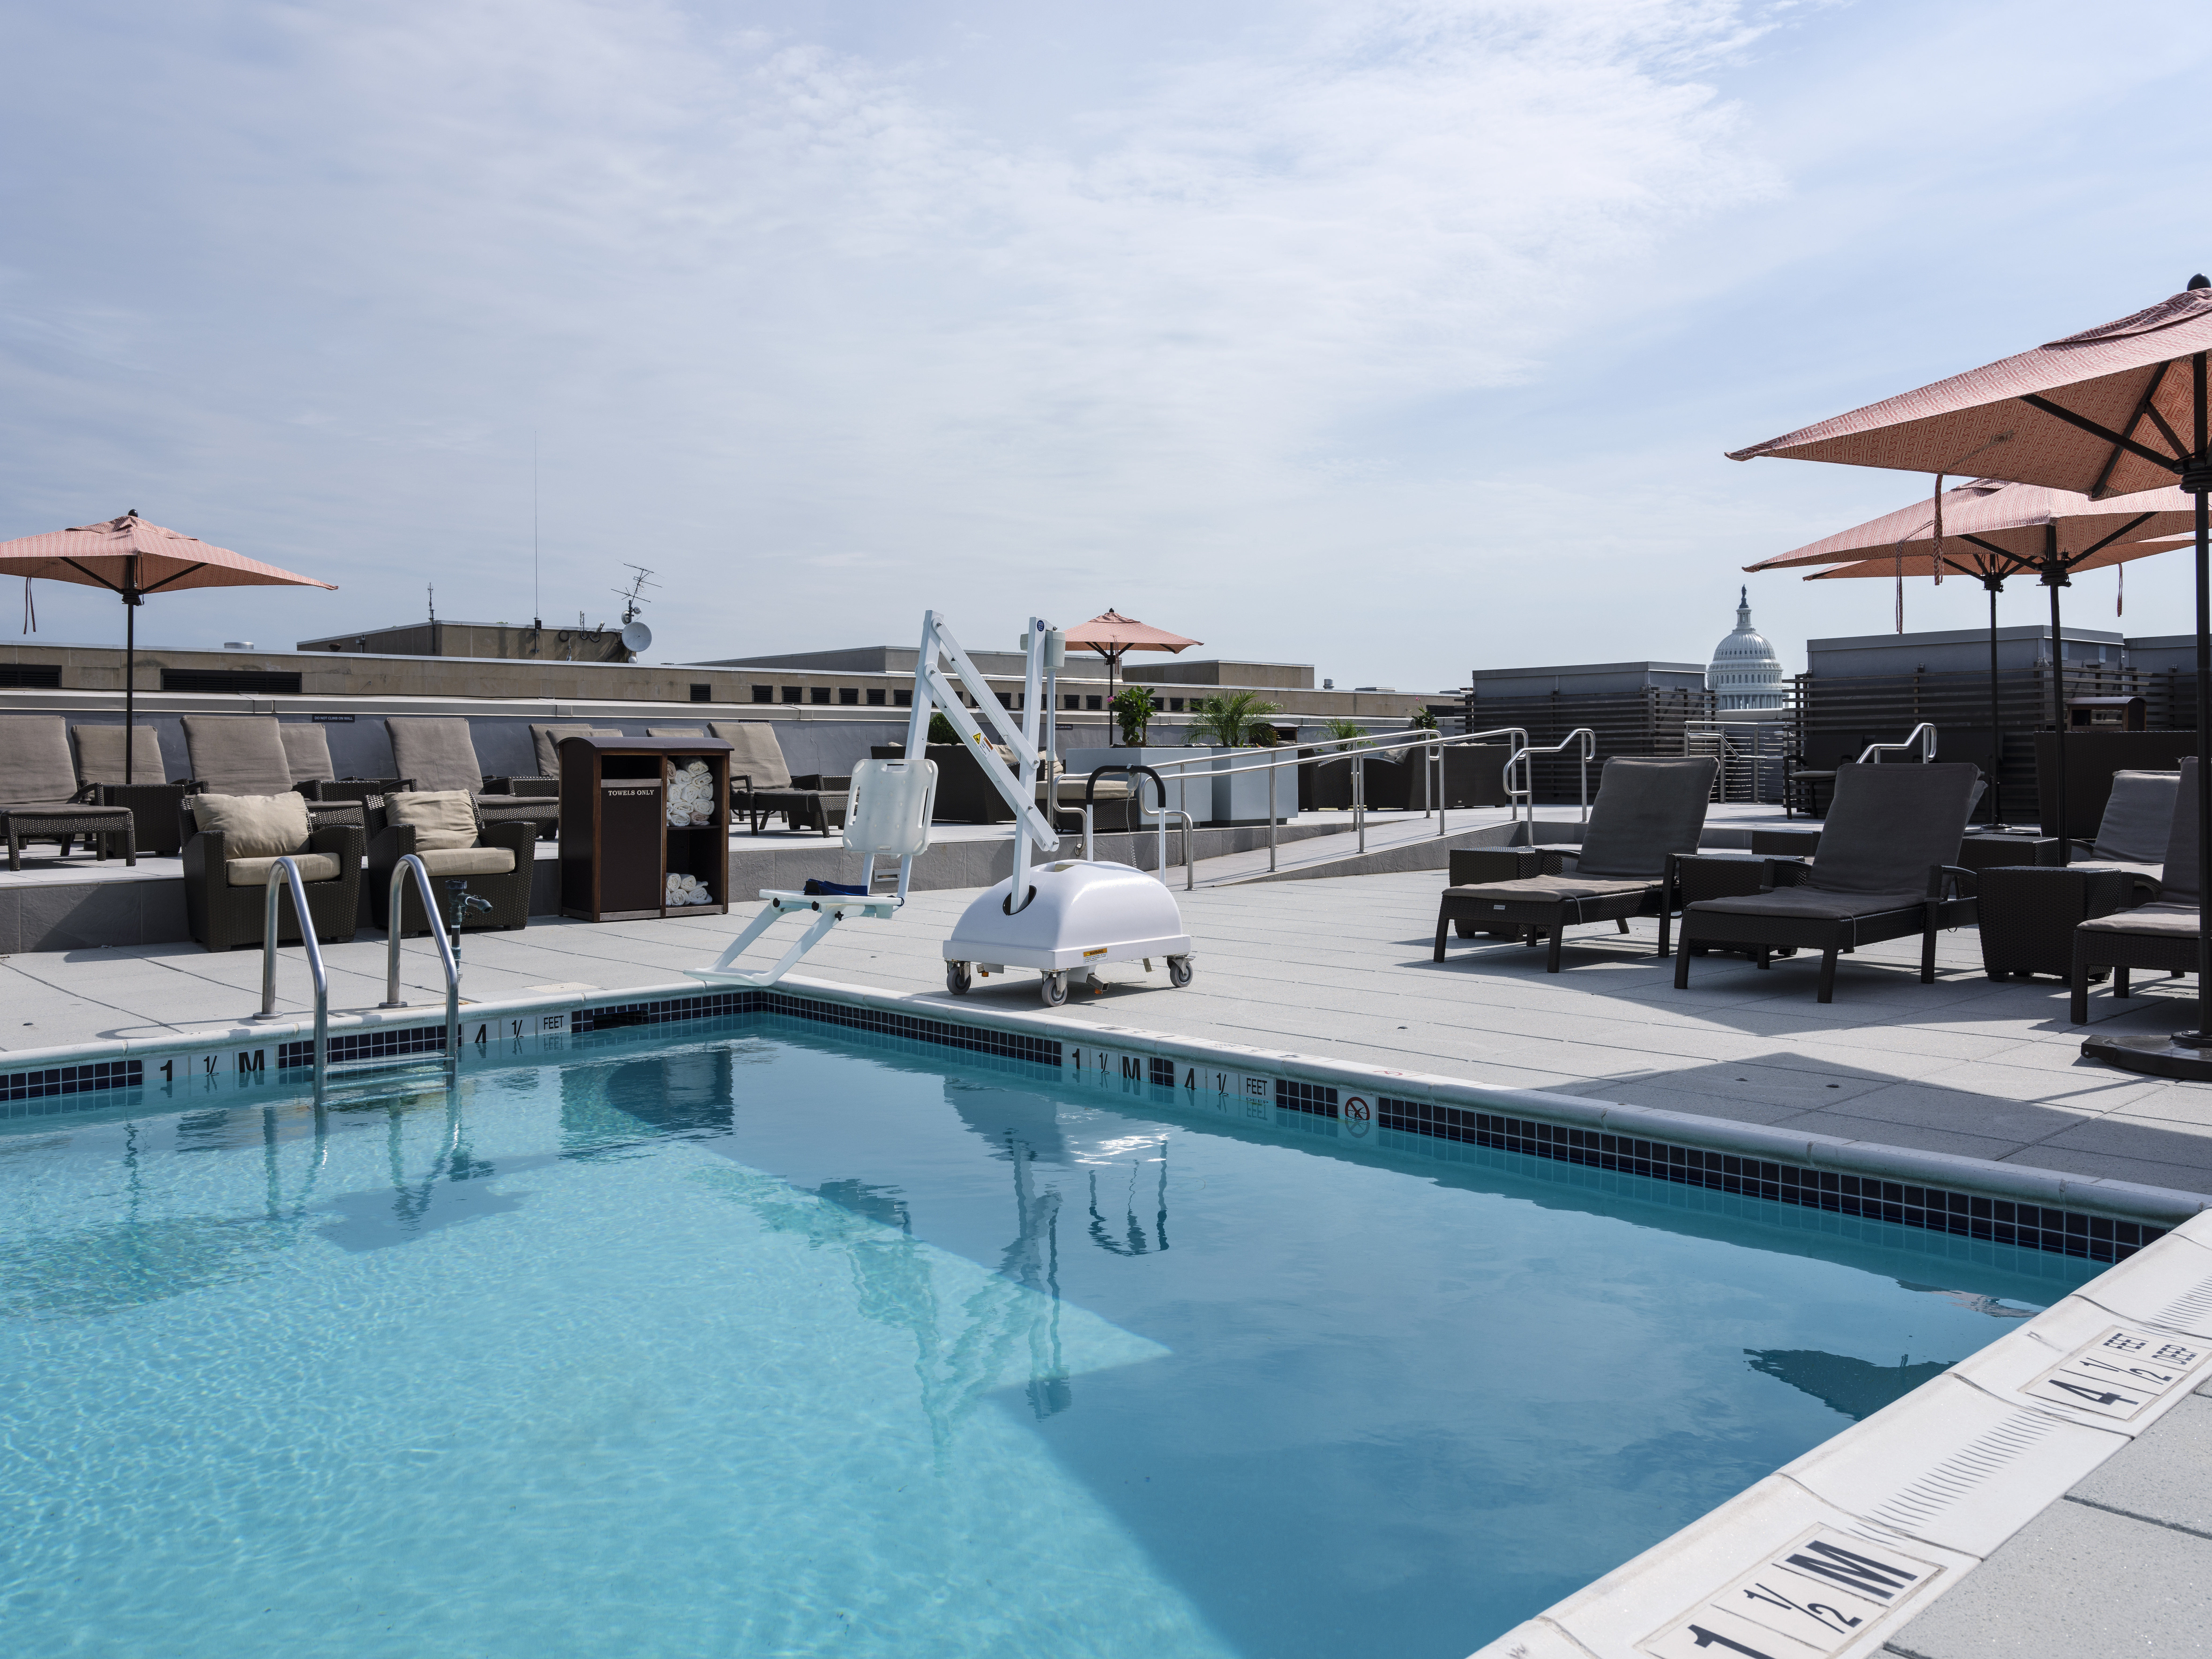 Our ADA lift allows all our guests to enjoy the rooftop pool.